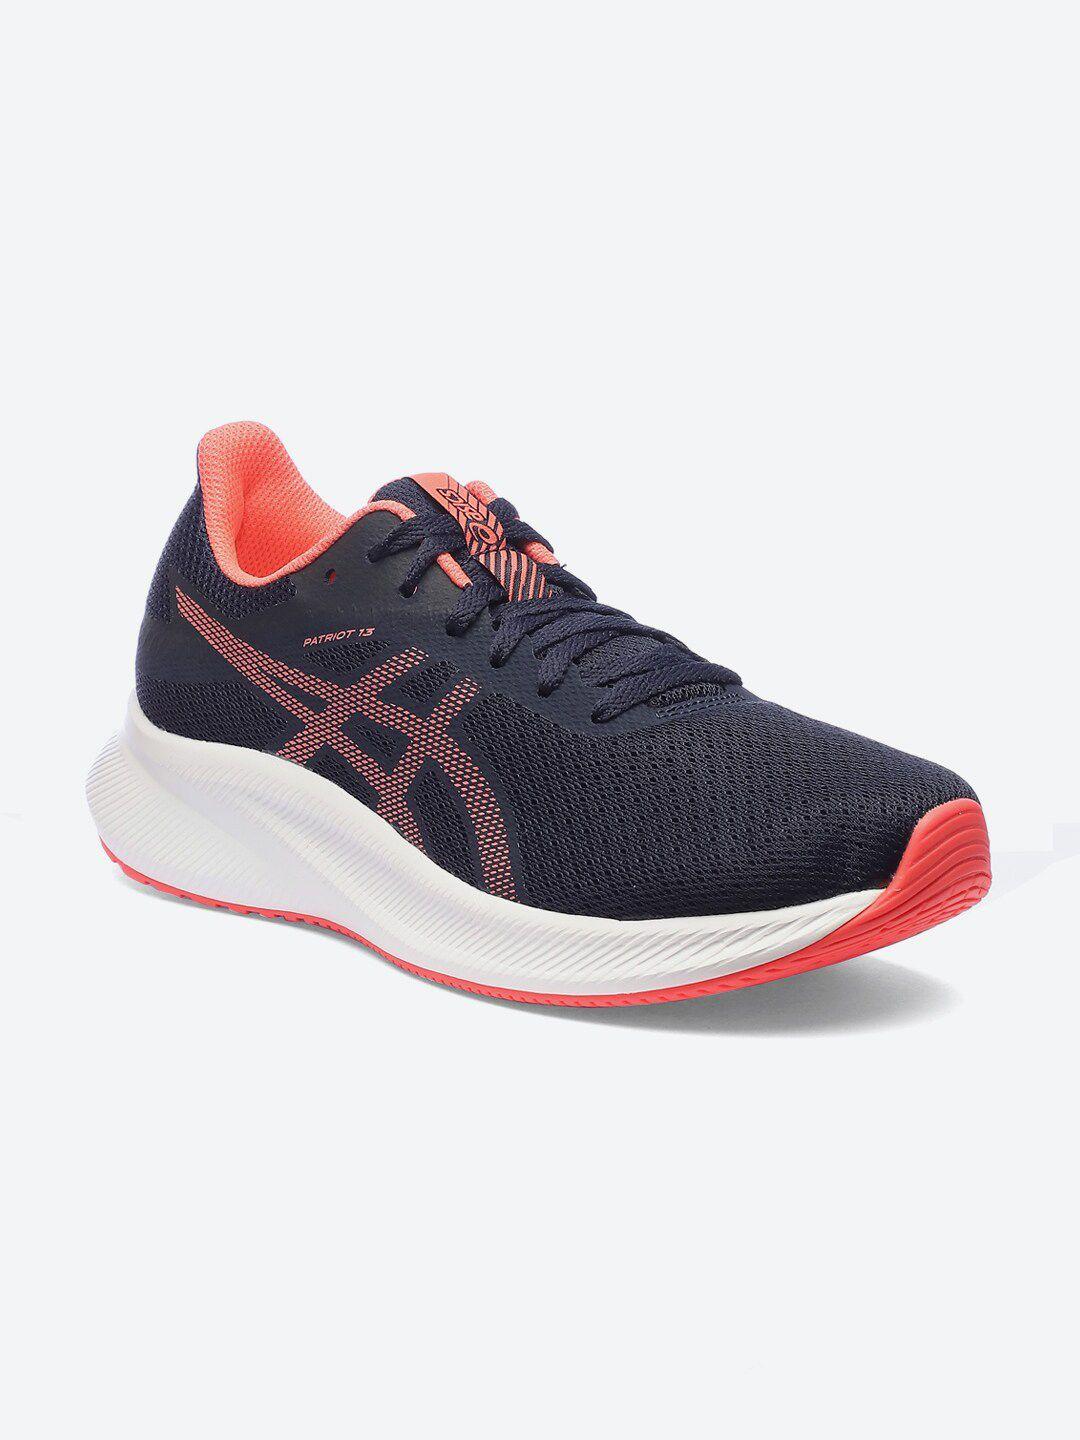 asics women patriot 13 non-marking lace-up sports shoes